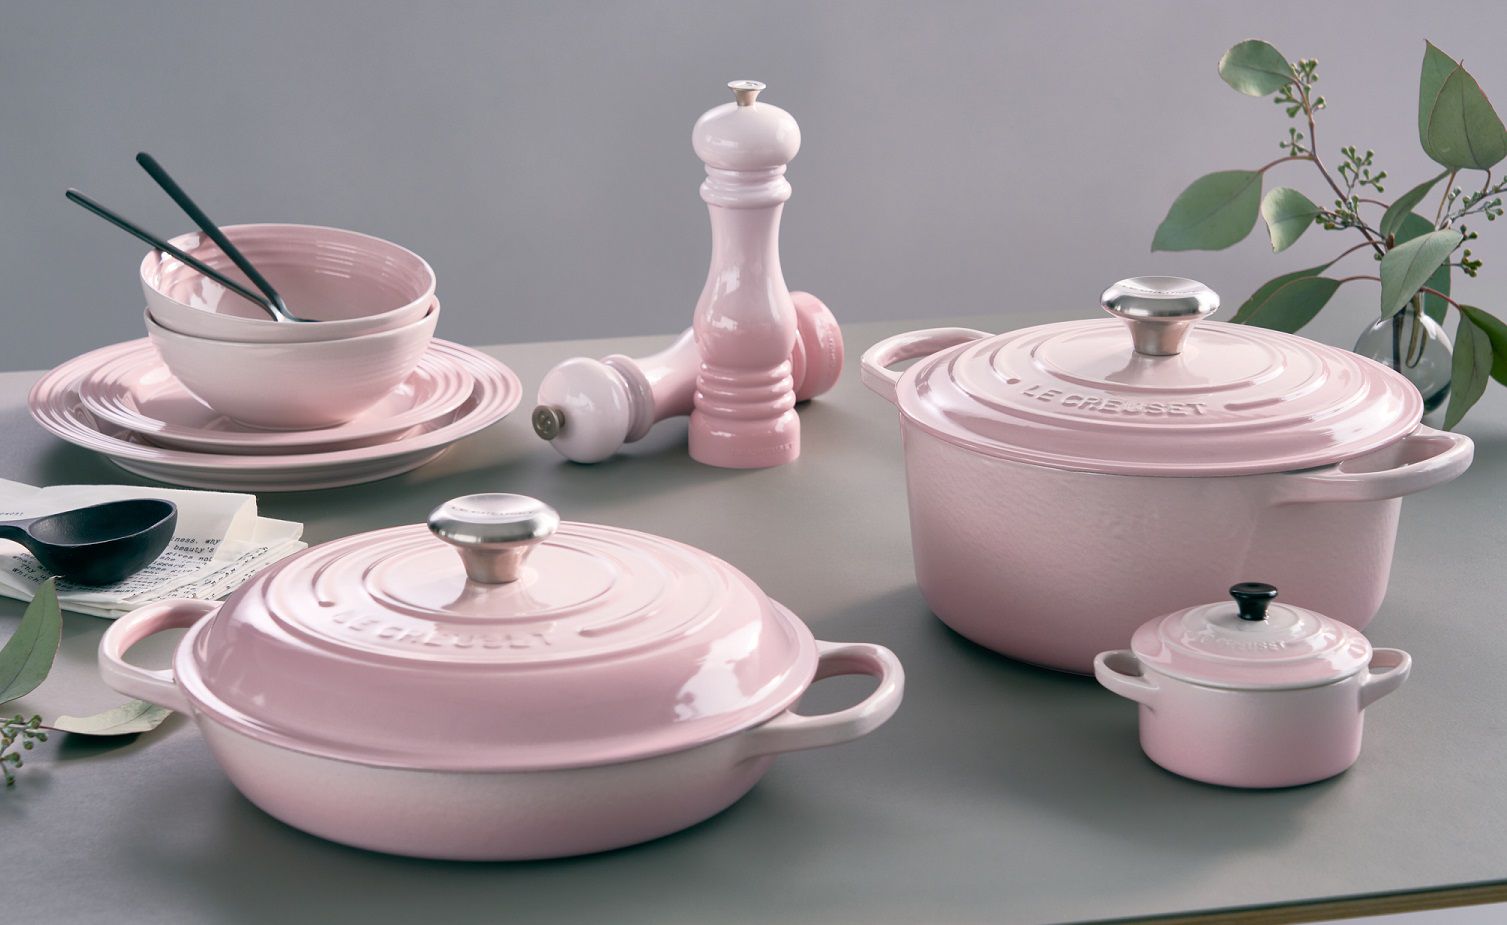 【Le Creuset JAPAN】Cute 14cm Sauce Pan In Shell pink Color Brand New